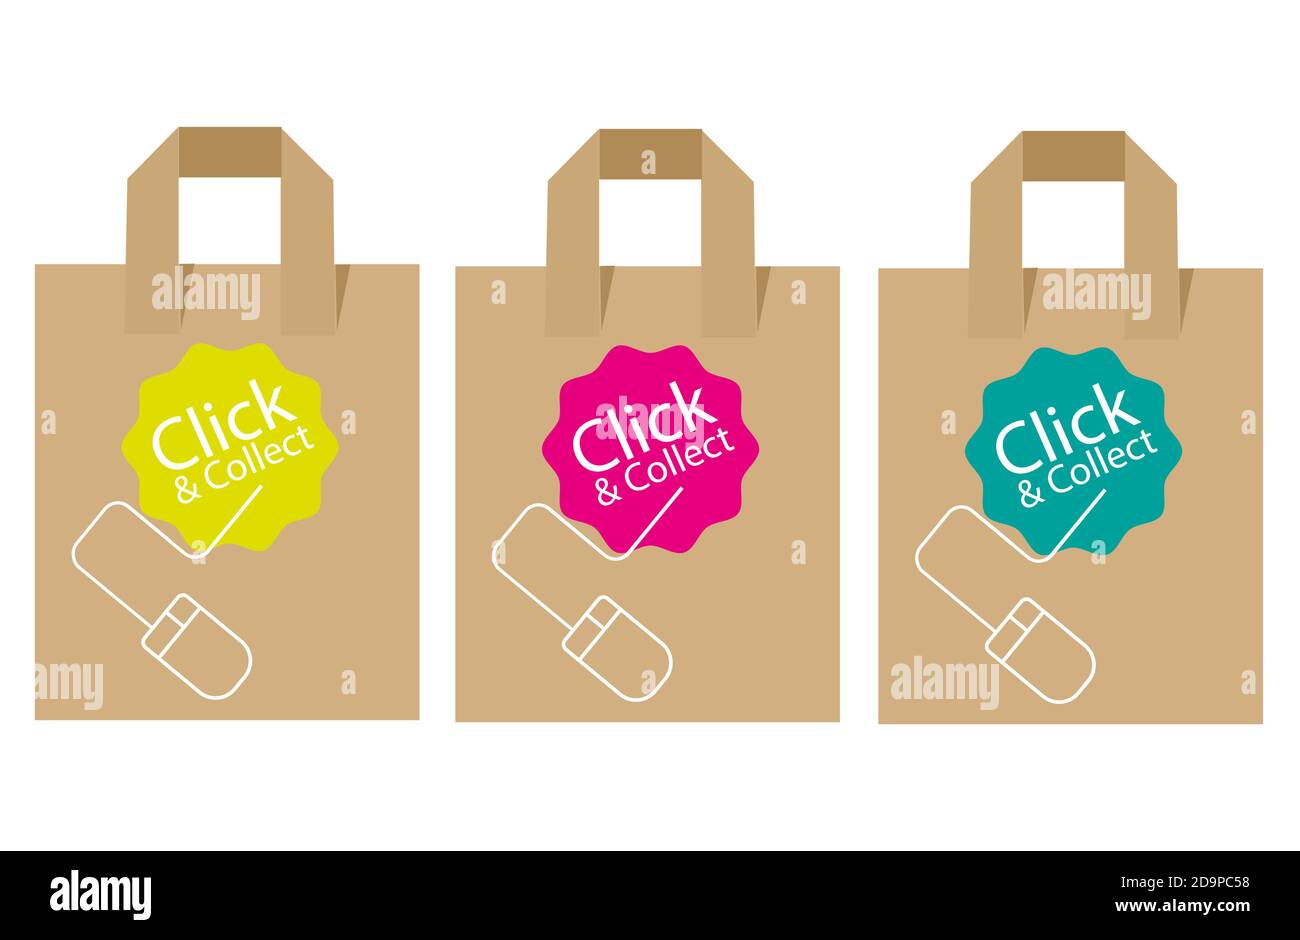 Click and Collect internet and online shopping concept with eco friendly recyclable carrier bags on a white background. Stock Vector